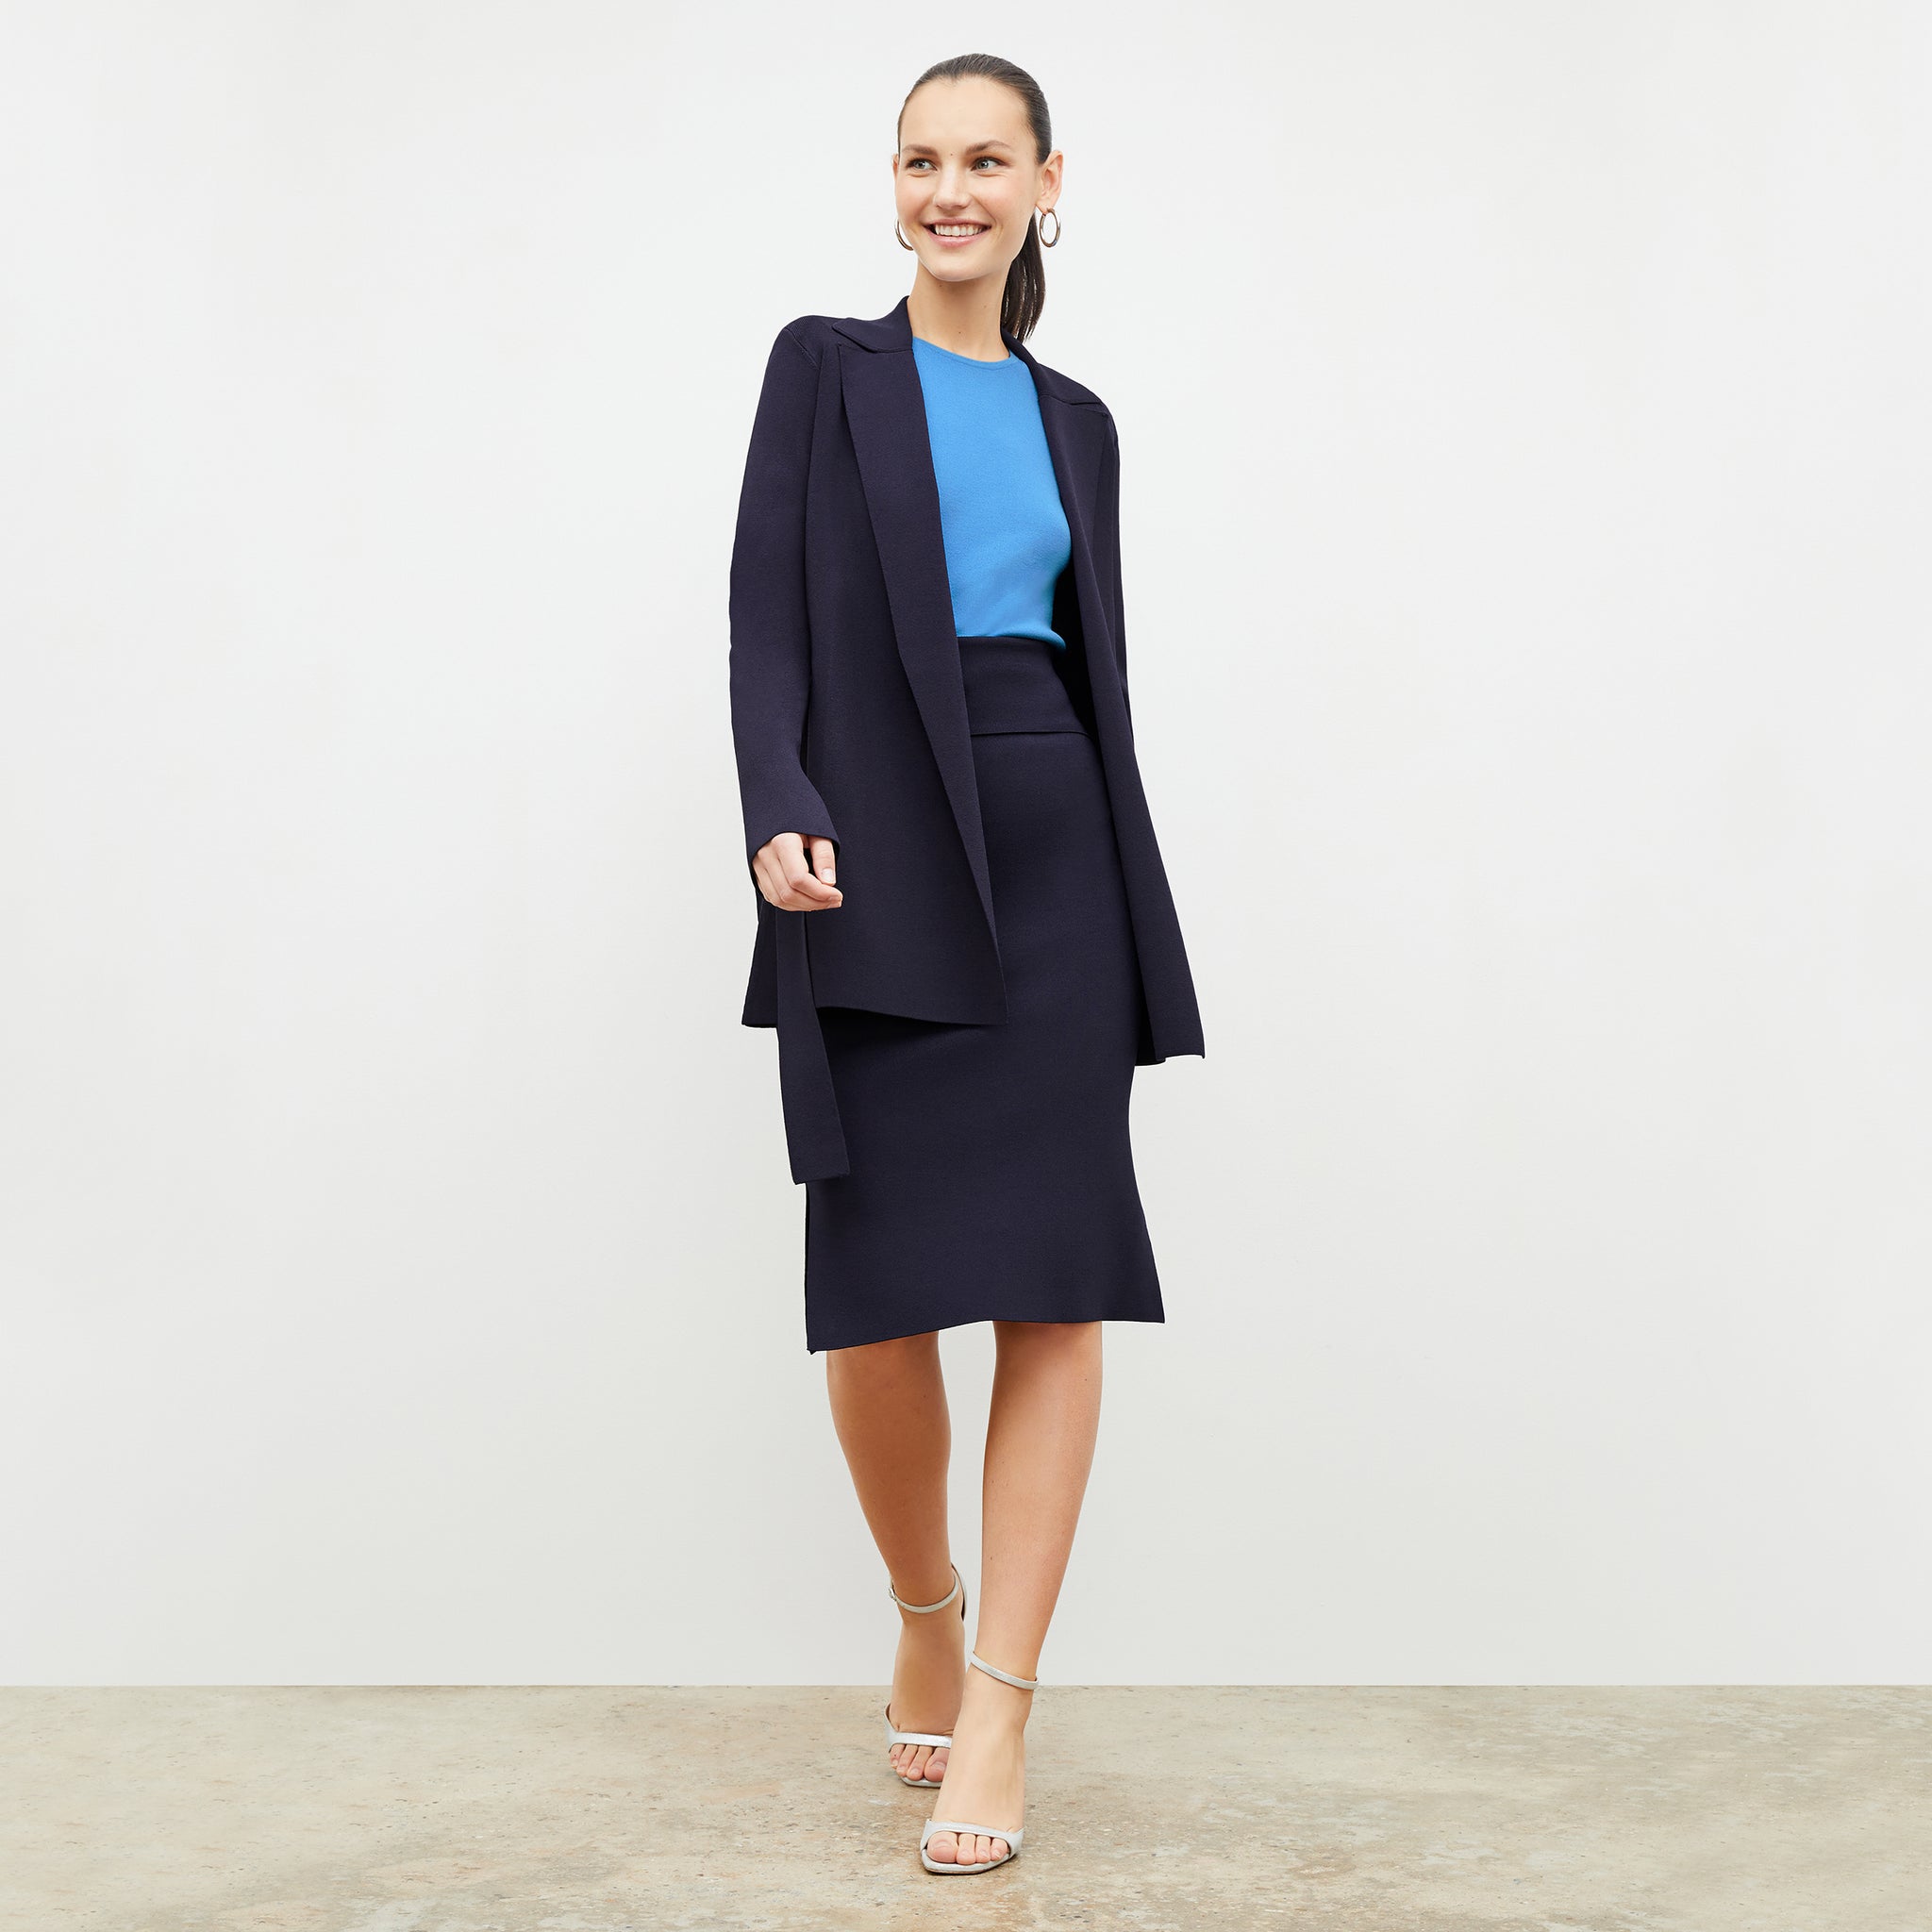 Front image of a woman wearing the harlem skirt in navy